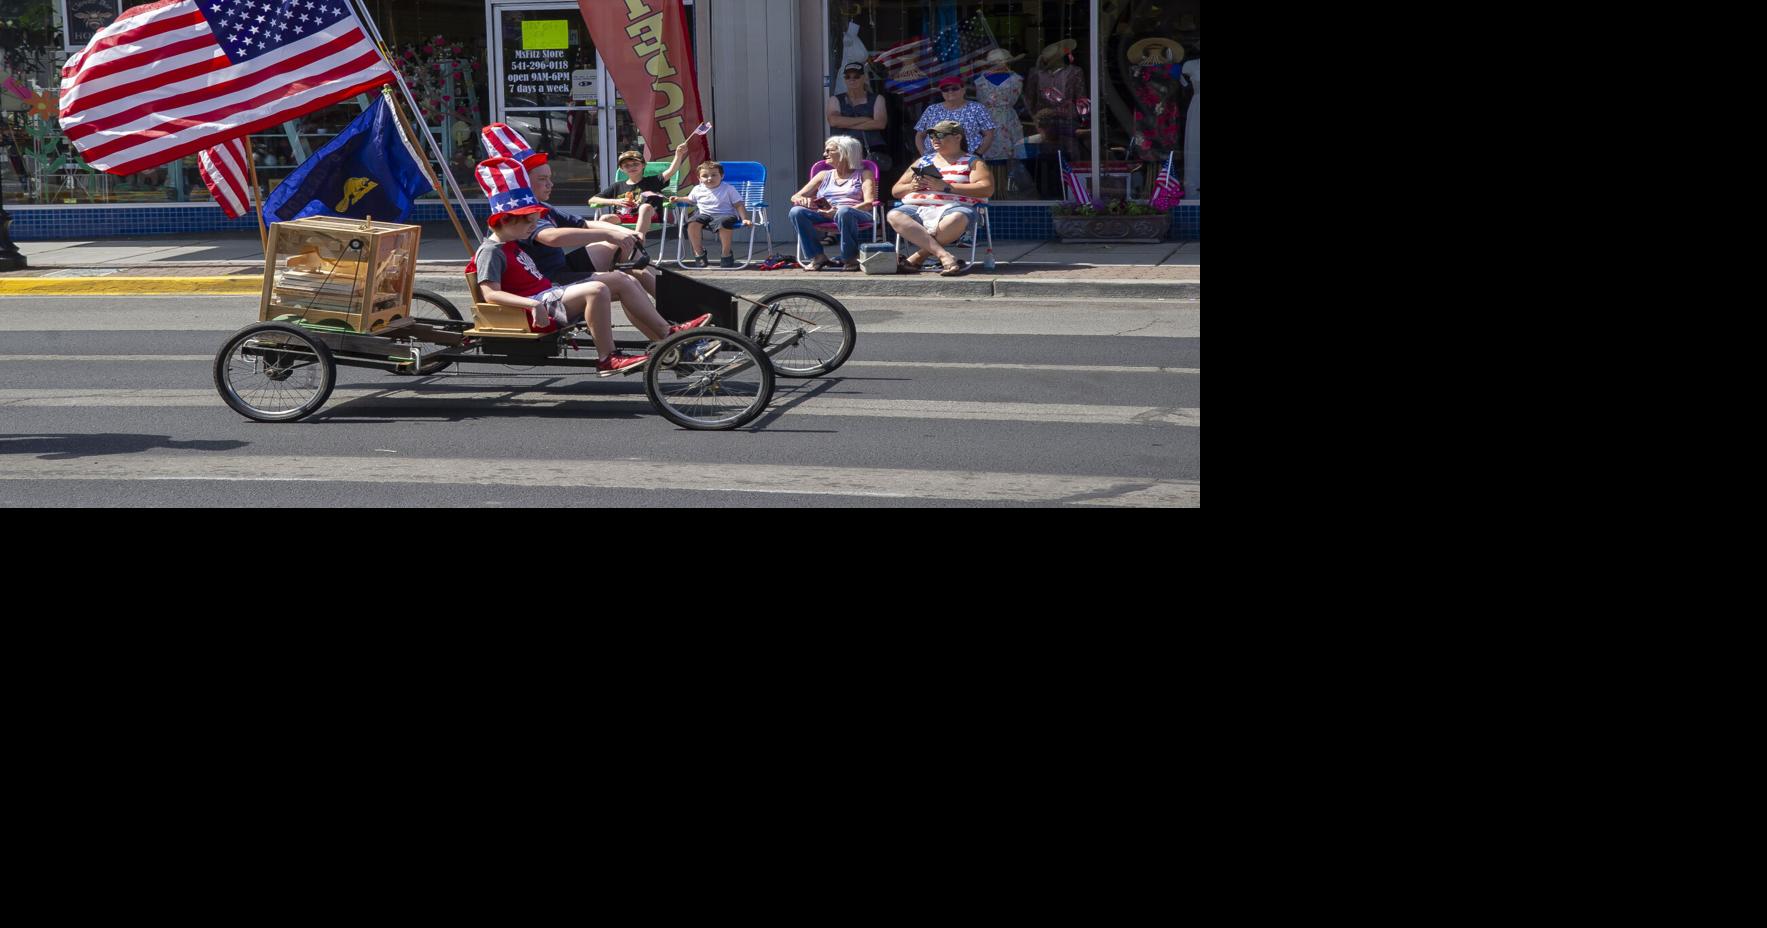 Fourth of July Parade in The Dalles